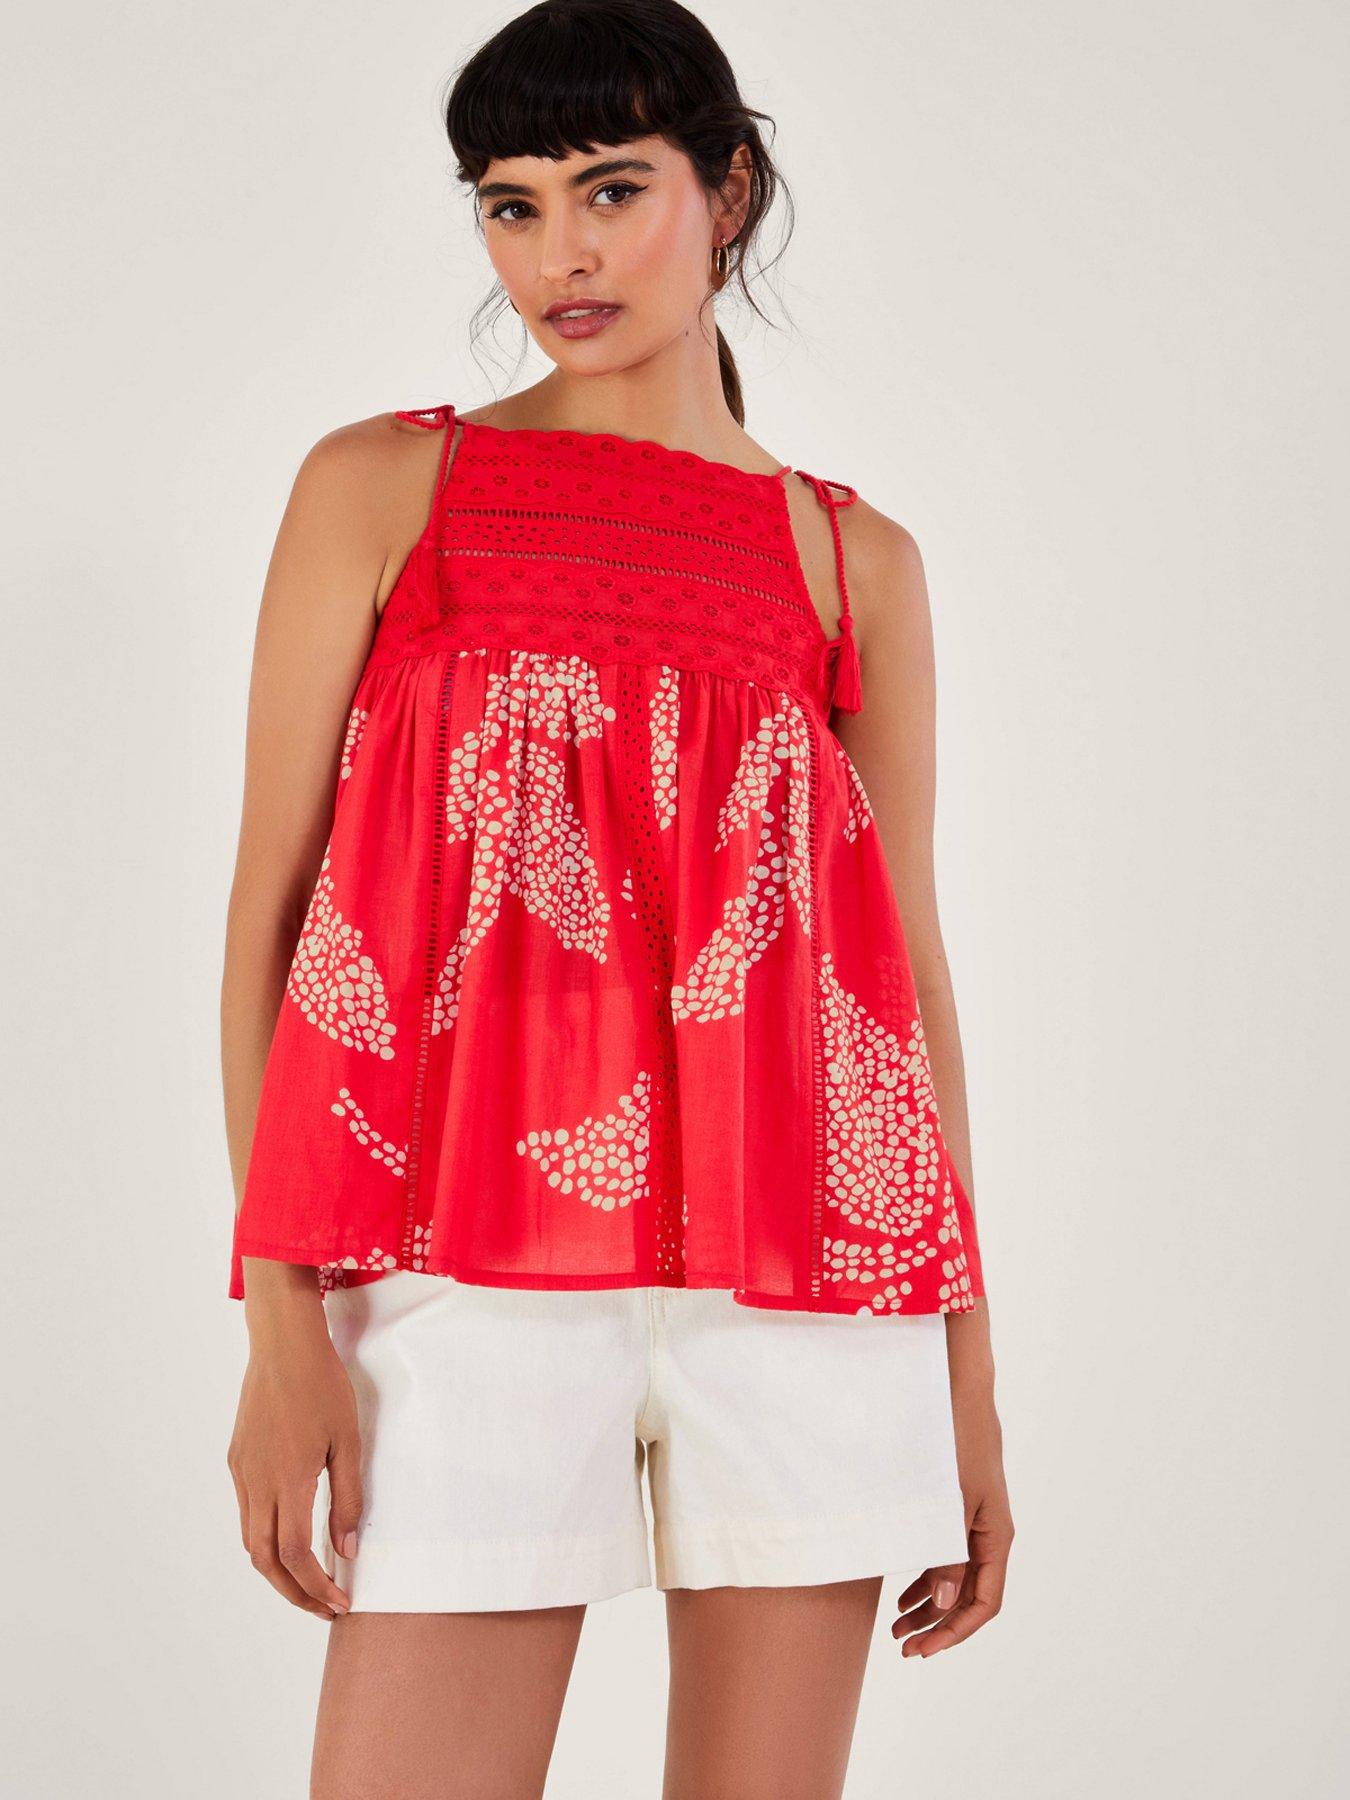 Monsoon Embroidered Cami Top in LENZING ECOVERO